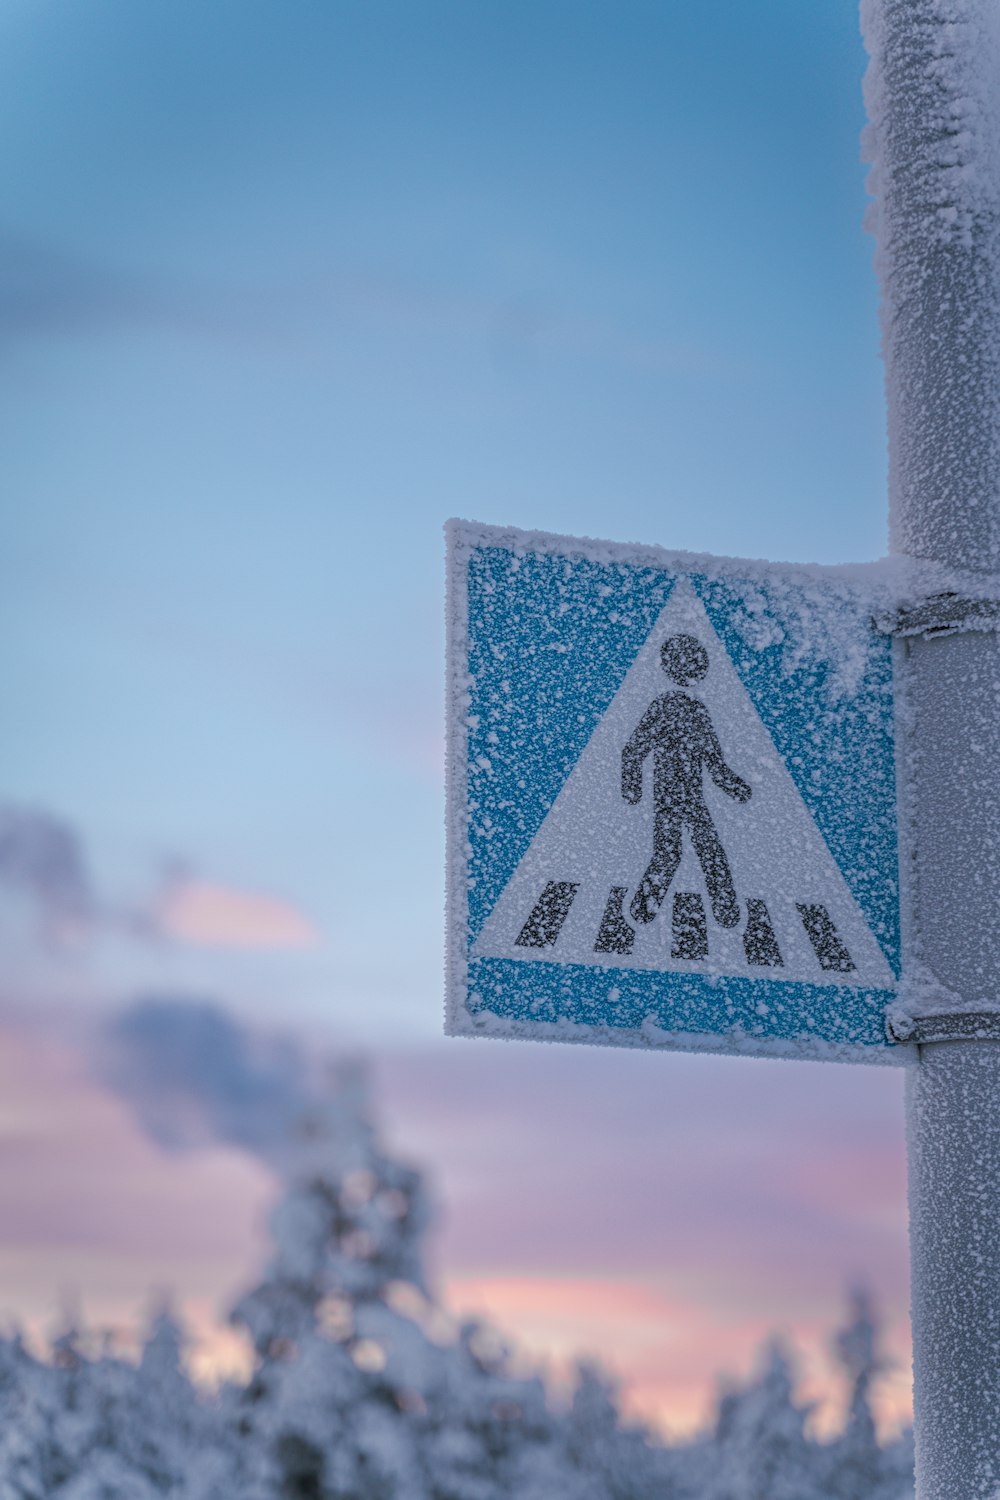 a pedestrian crossing sign is covered in snow